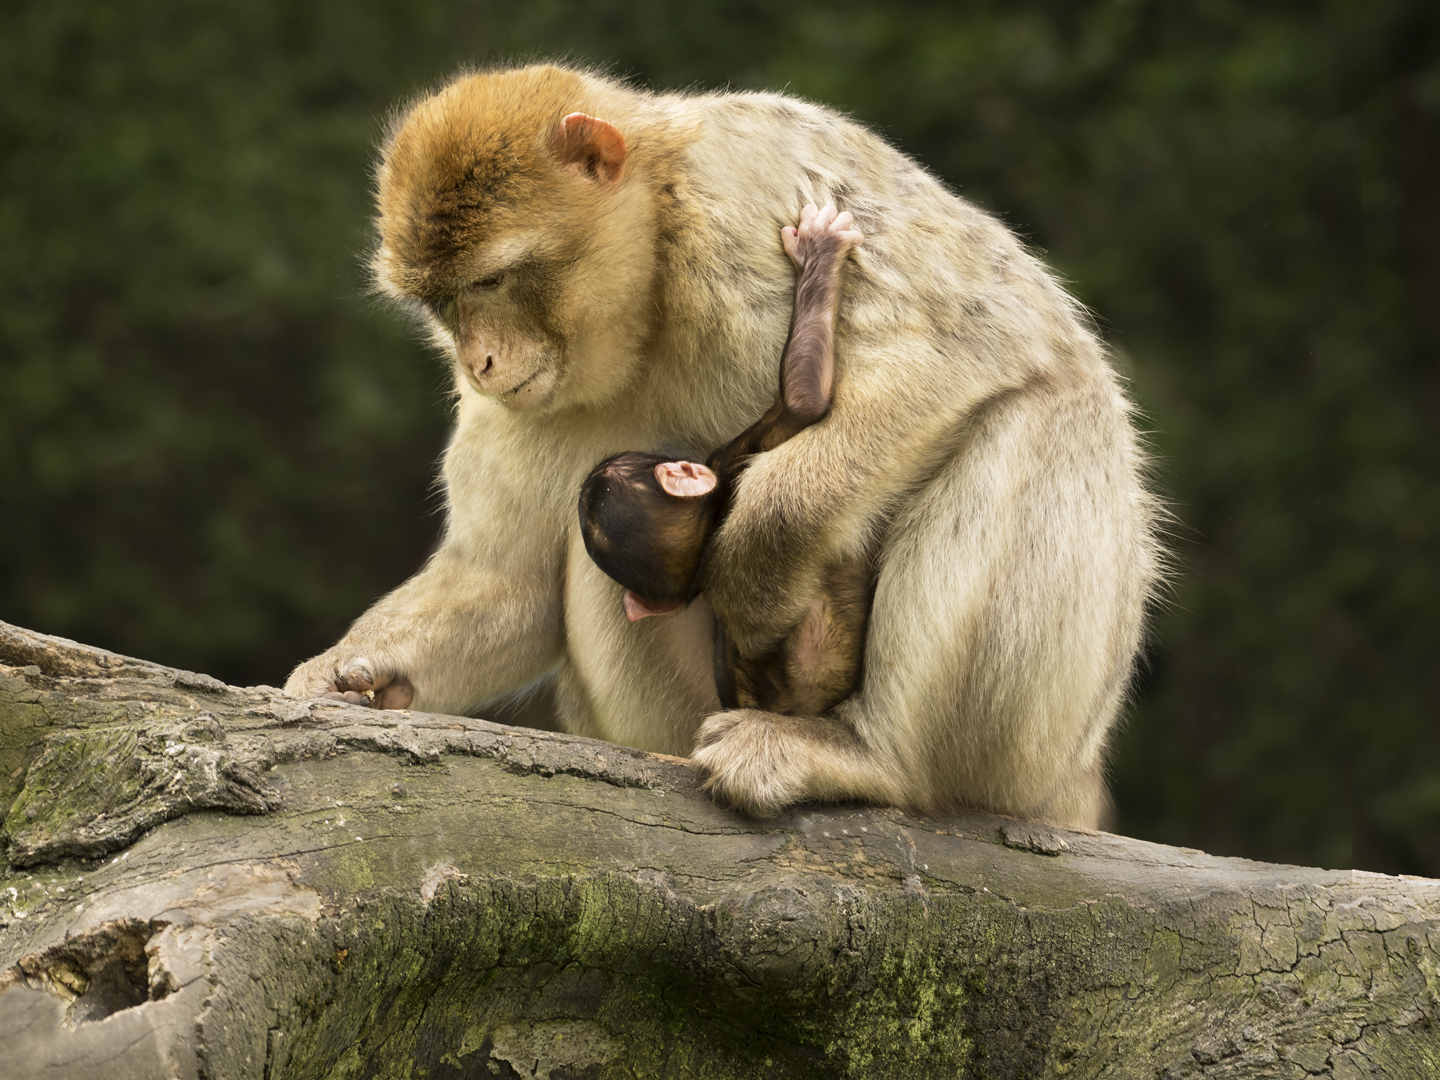 C - Macaque with baby - Sian Davies